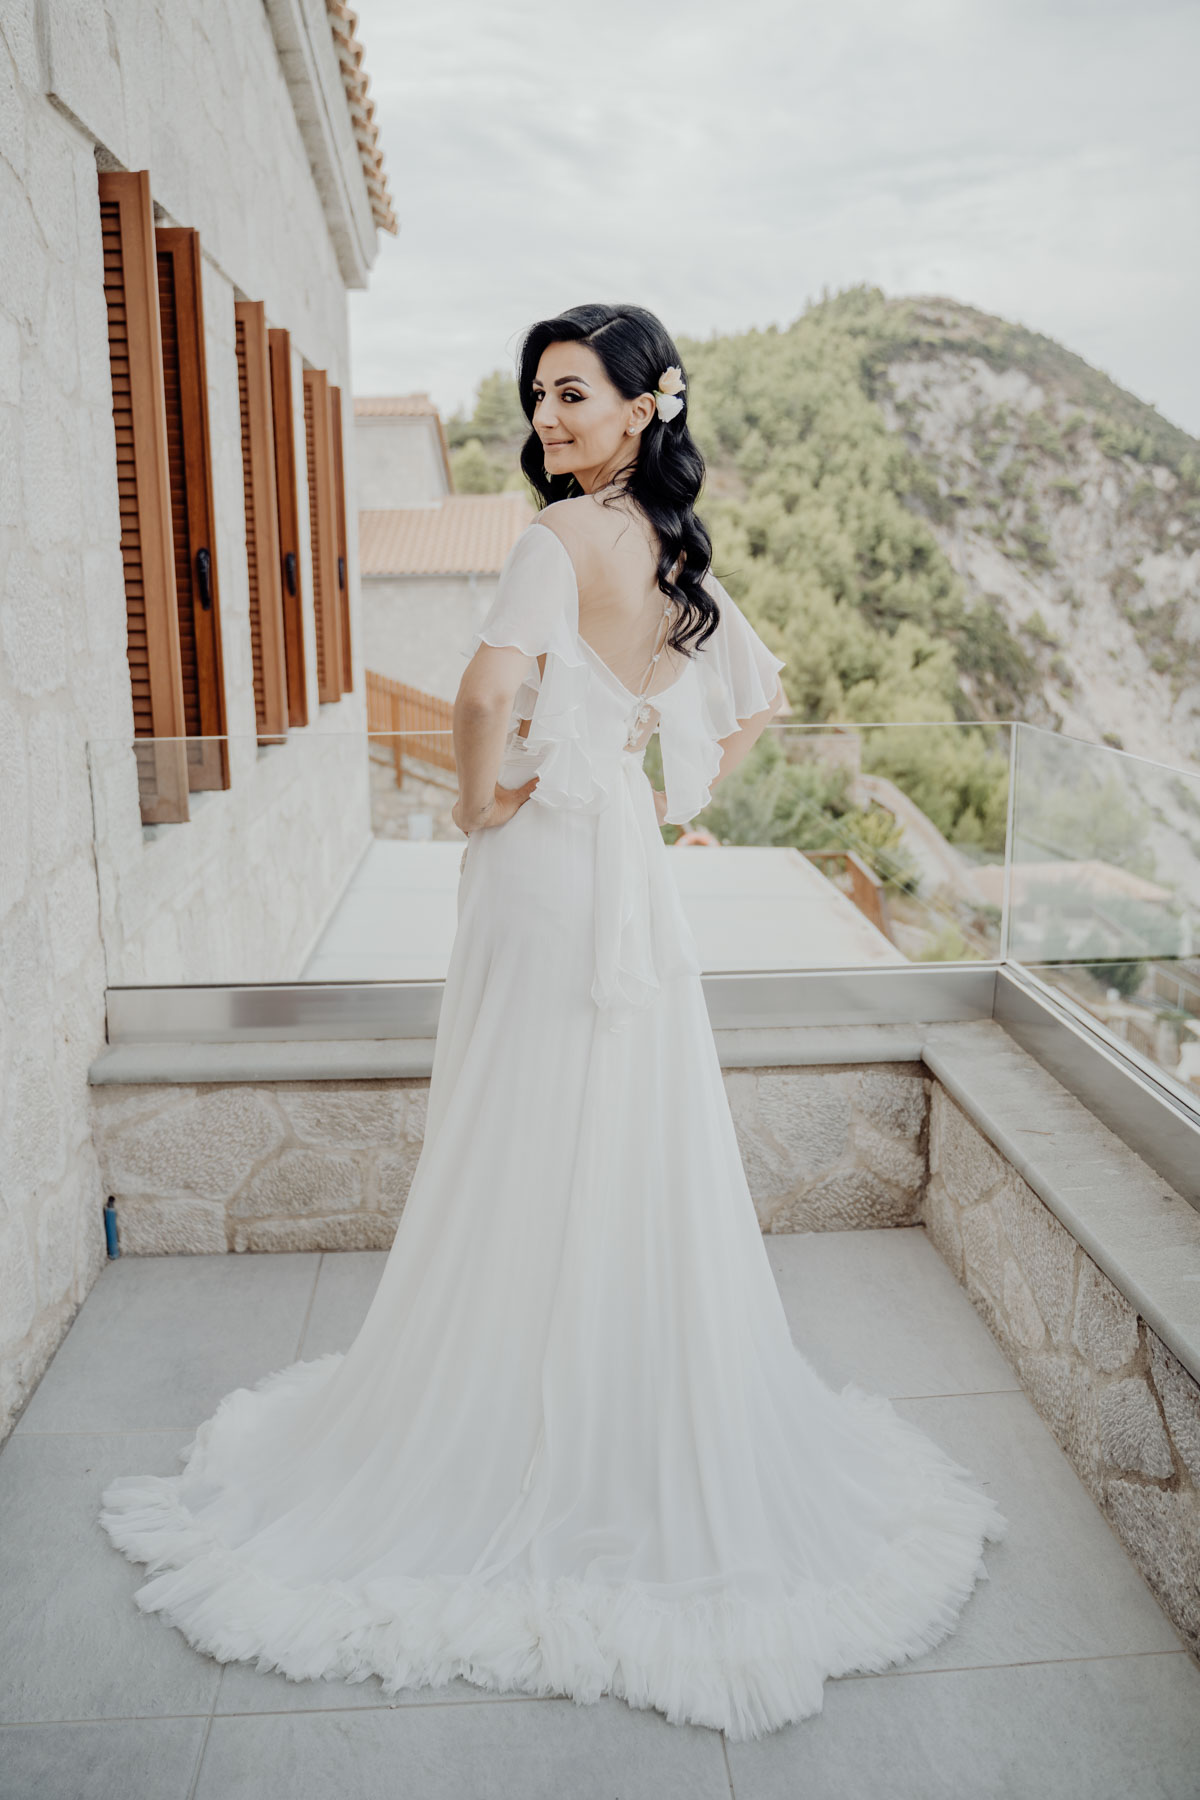 From a hand-drawn sketch to reality: A dream wedding in Greece